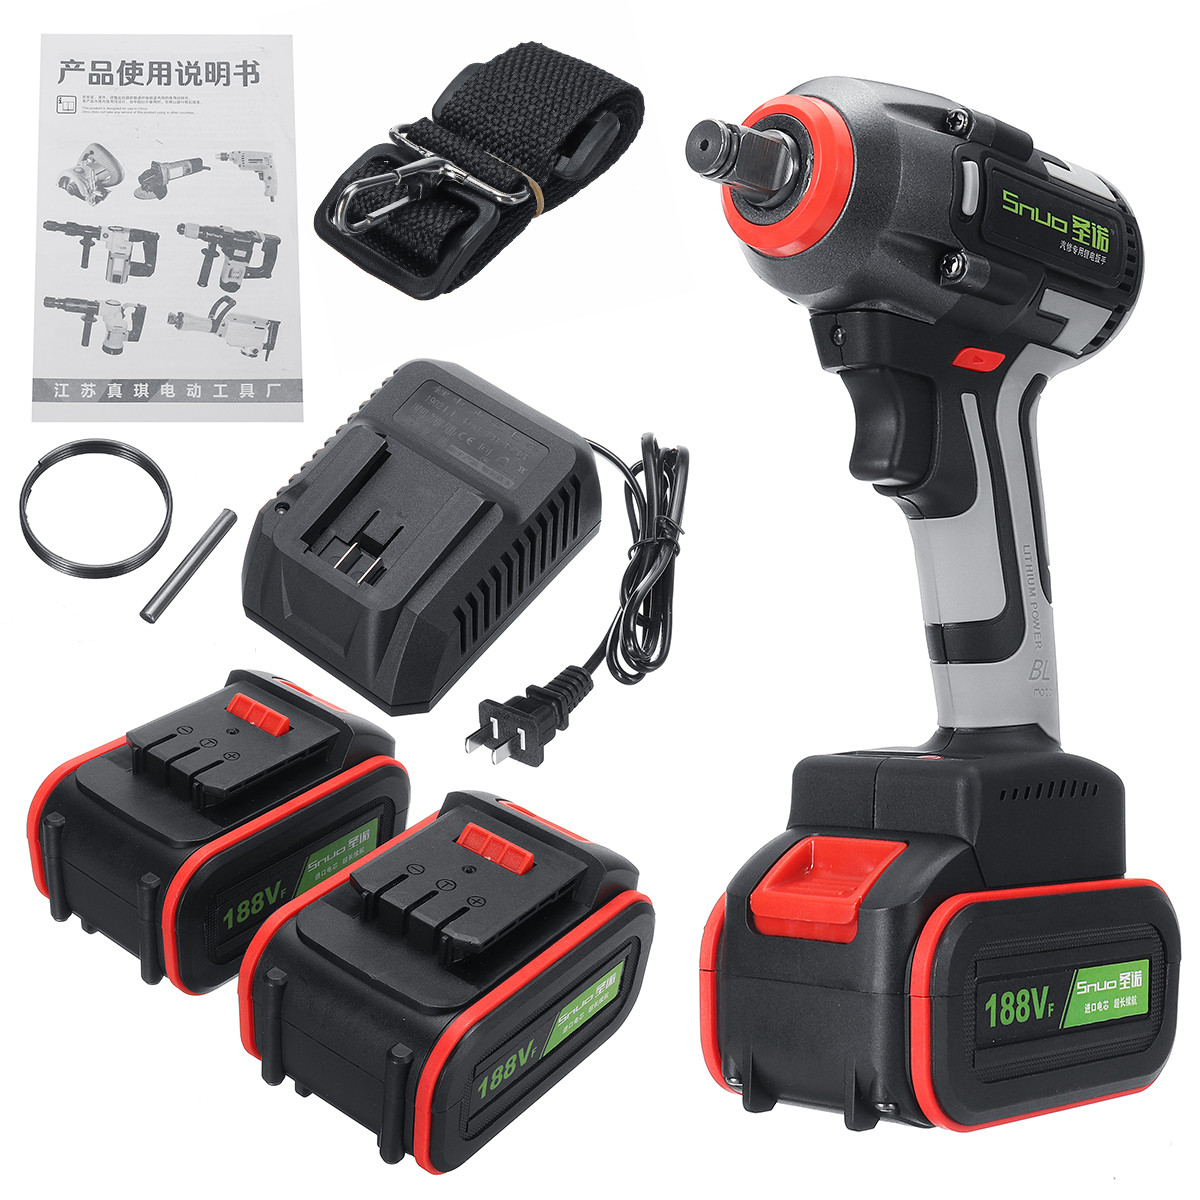 100-240V-Torque-450NM-Electric-Impact-Wrench-Cordless-Motor-Brushless-Rattle-Driver-1444636-7